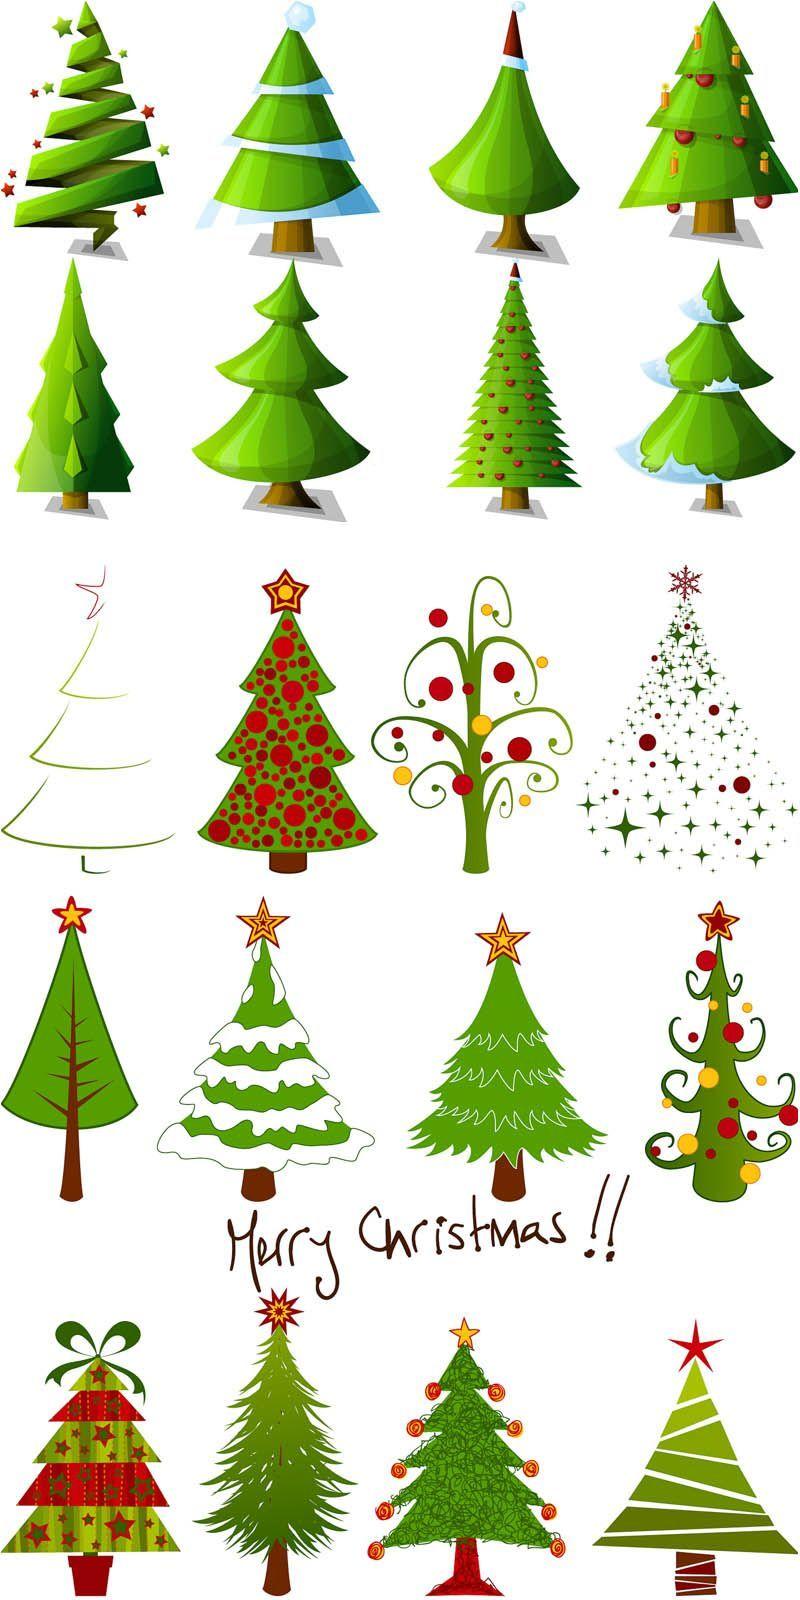 Christmas Pine Tree Logo - 2 Sets of 20 vector cartoon Christmas tree designs in different ...